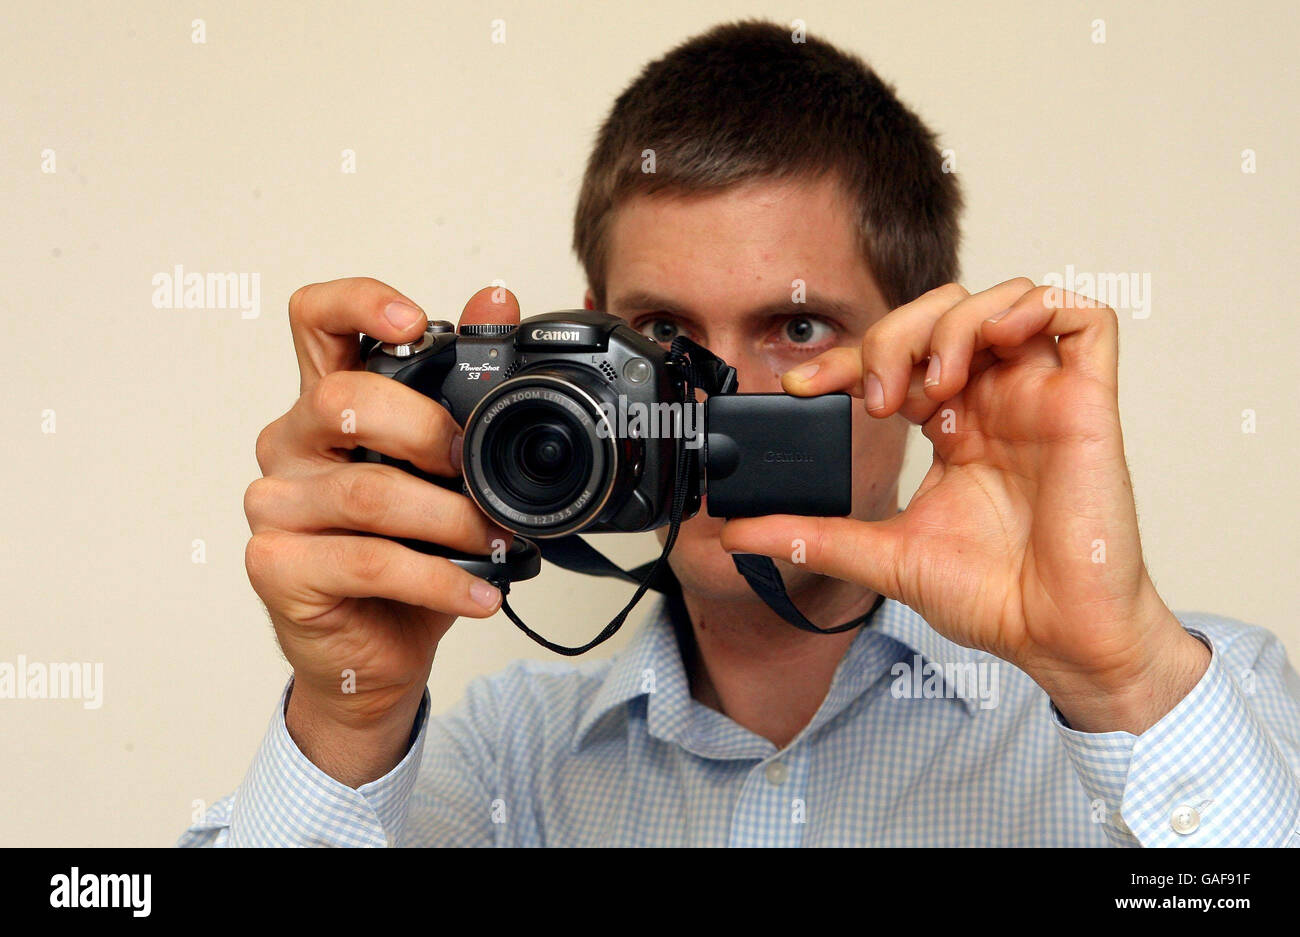 Stock photo of a photographer using a Canon Powershot S3 IS video camera  Stock Photo - Alamy